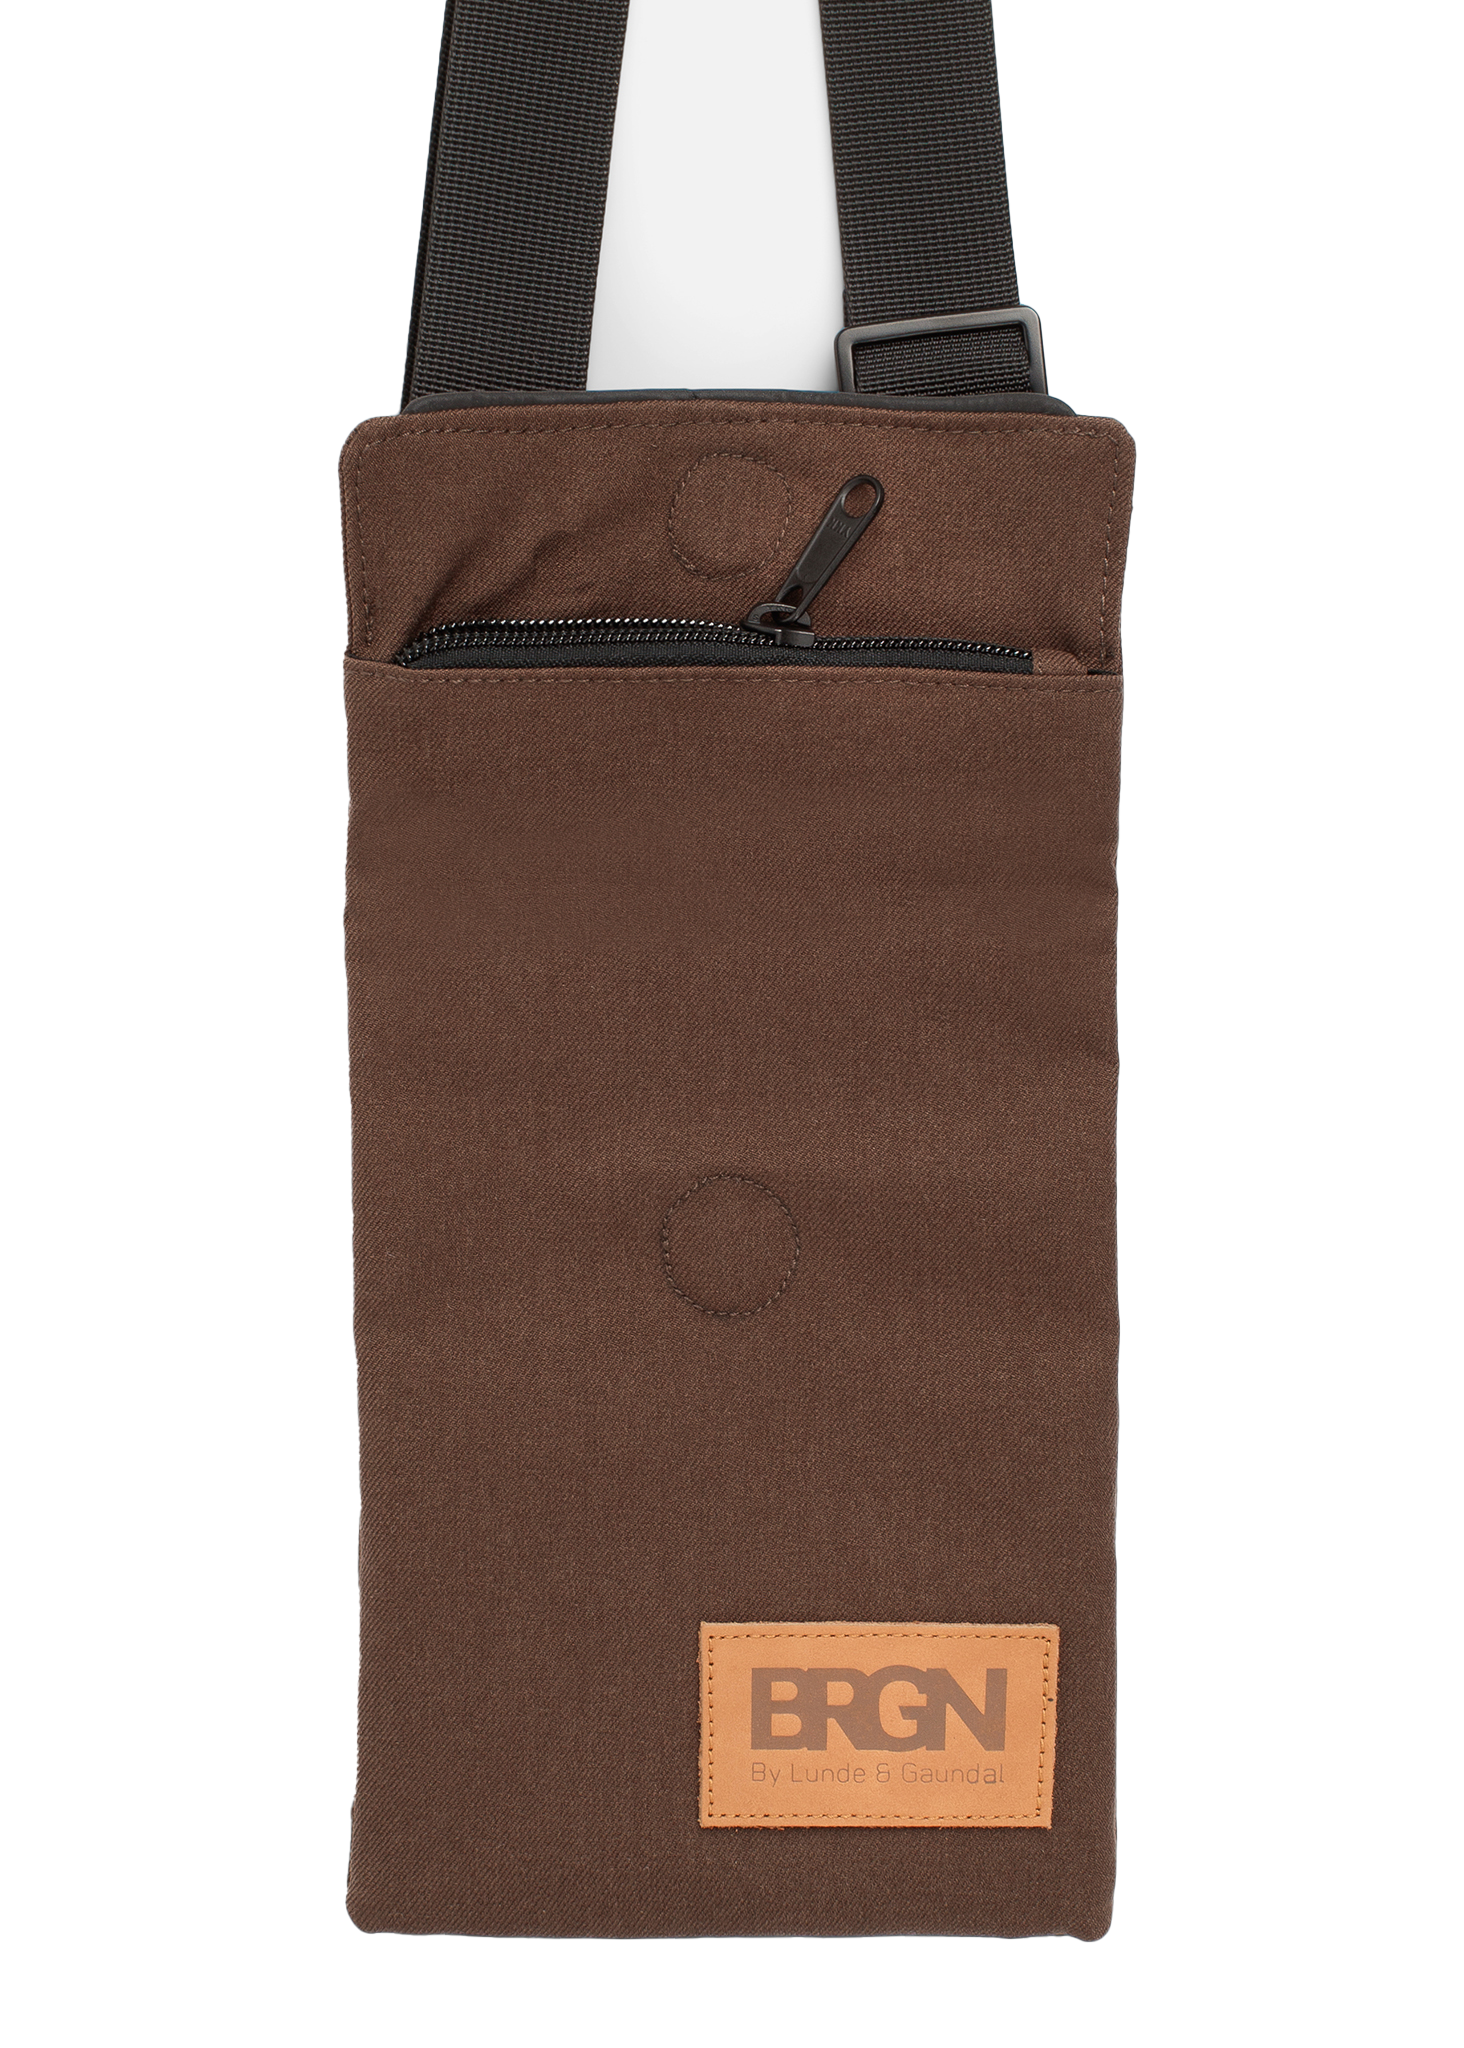 BRGN by Lunde & Gaundal Messenger Purse Accessories 187 Chocolate Brown